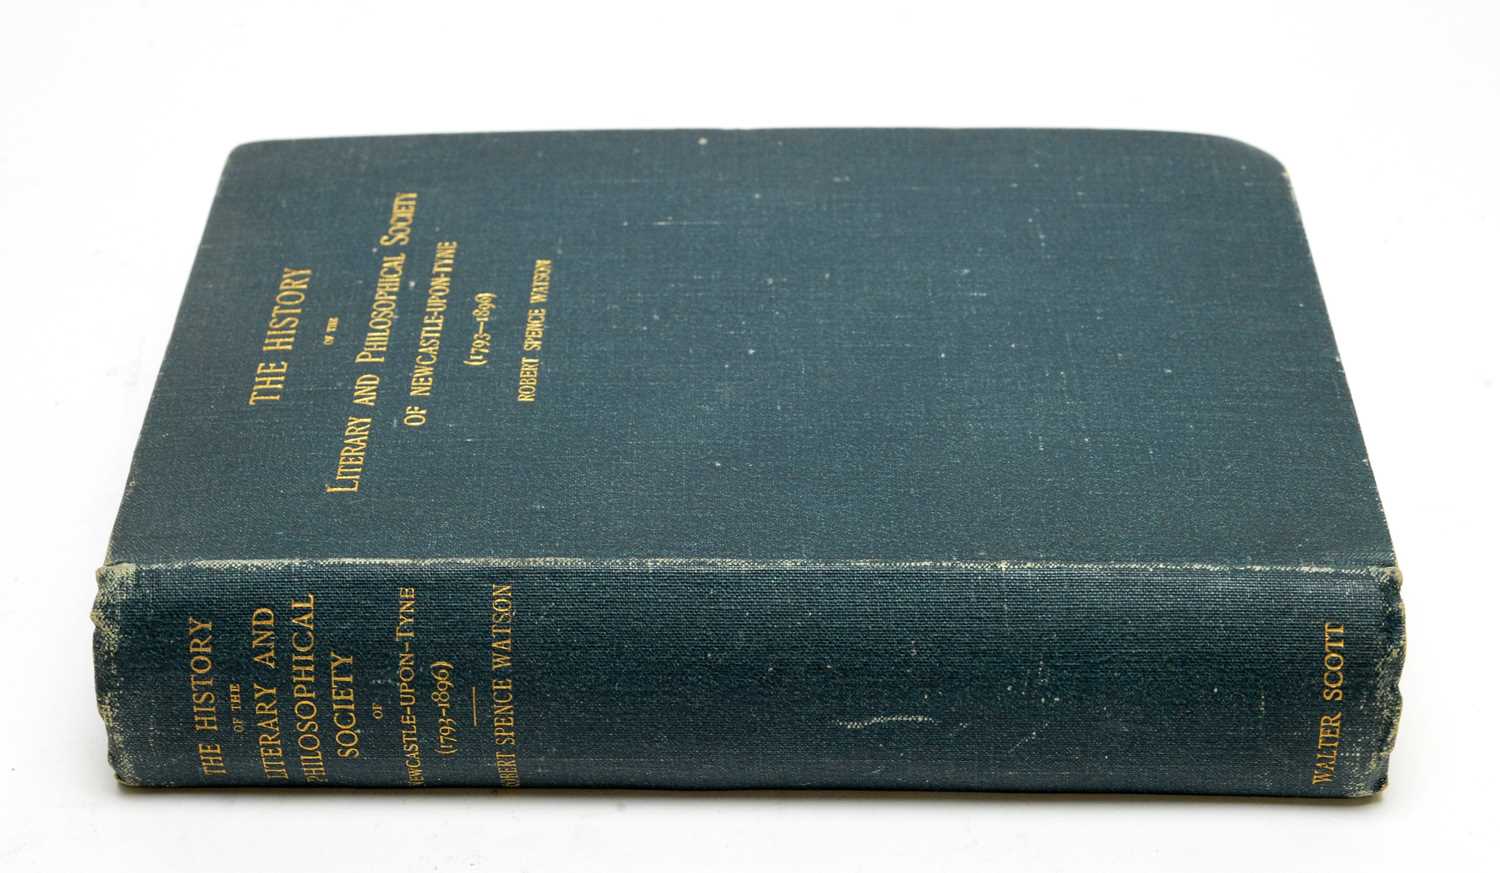 Lot 716 - The History of the Literary and Philosophical Society of Newcastle-upon-Tyne